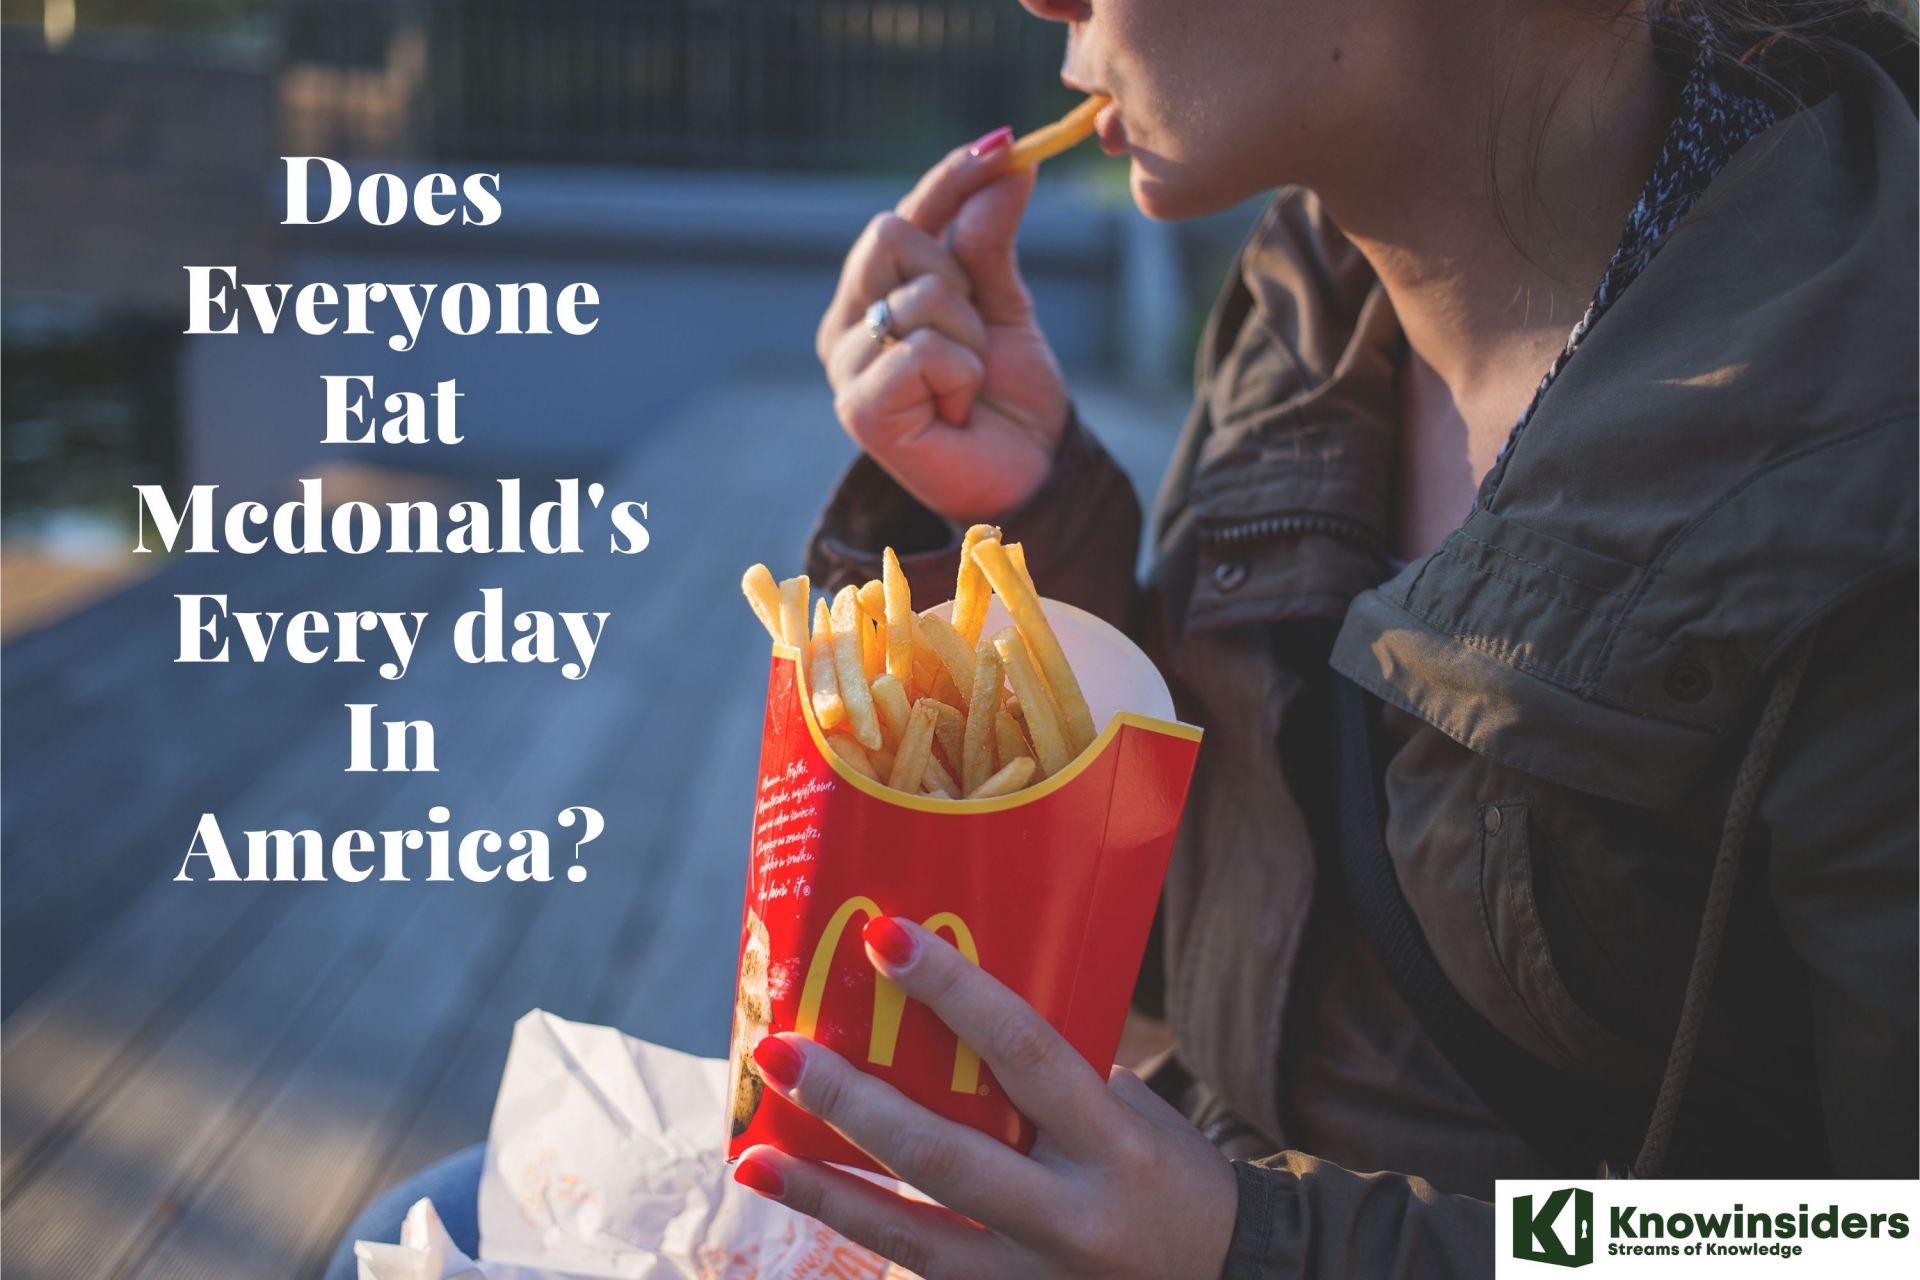 Does Everyone Eat Mcdonald's Every day In America?